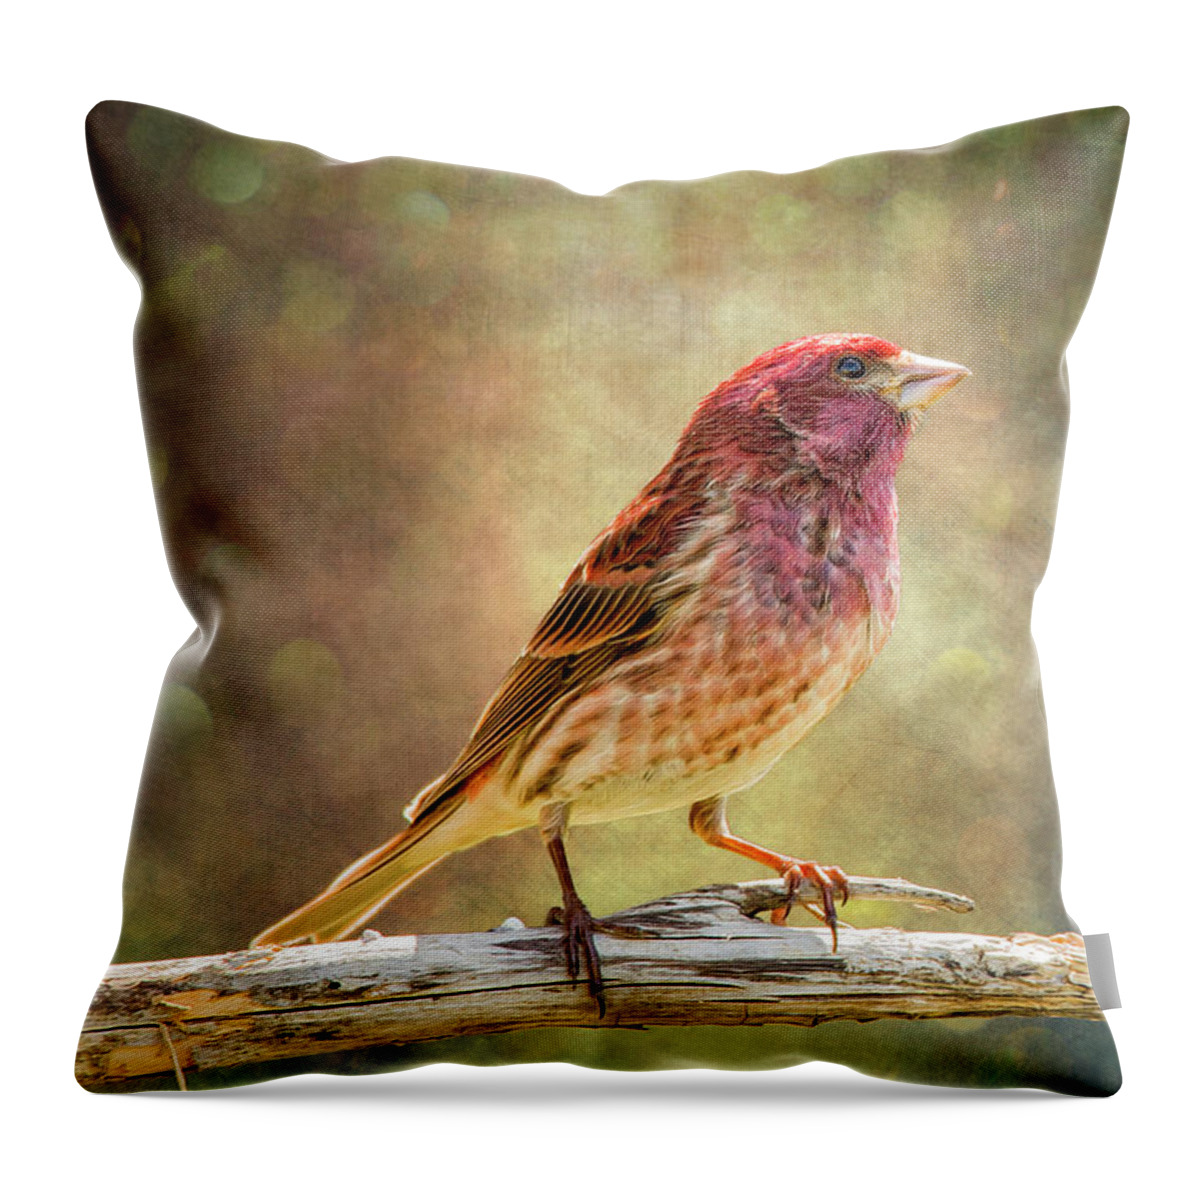 Chordata Throw Pillow featuring the photograph Mr Finch Afternoon Bokeh by Bill and Linda Tiepelman